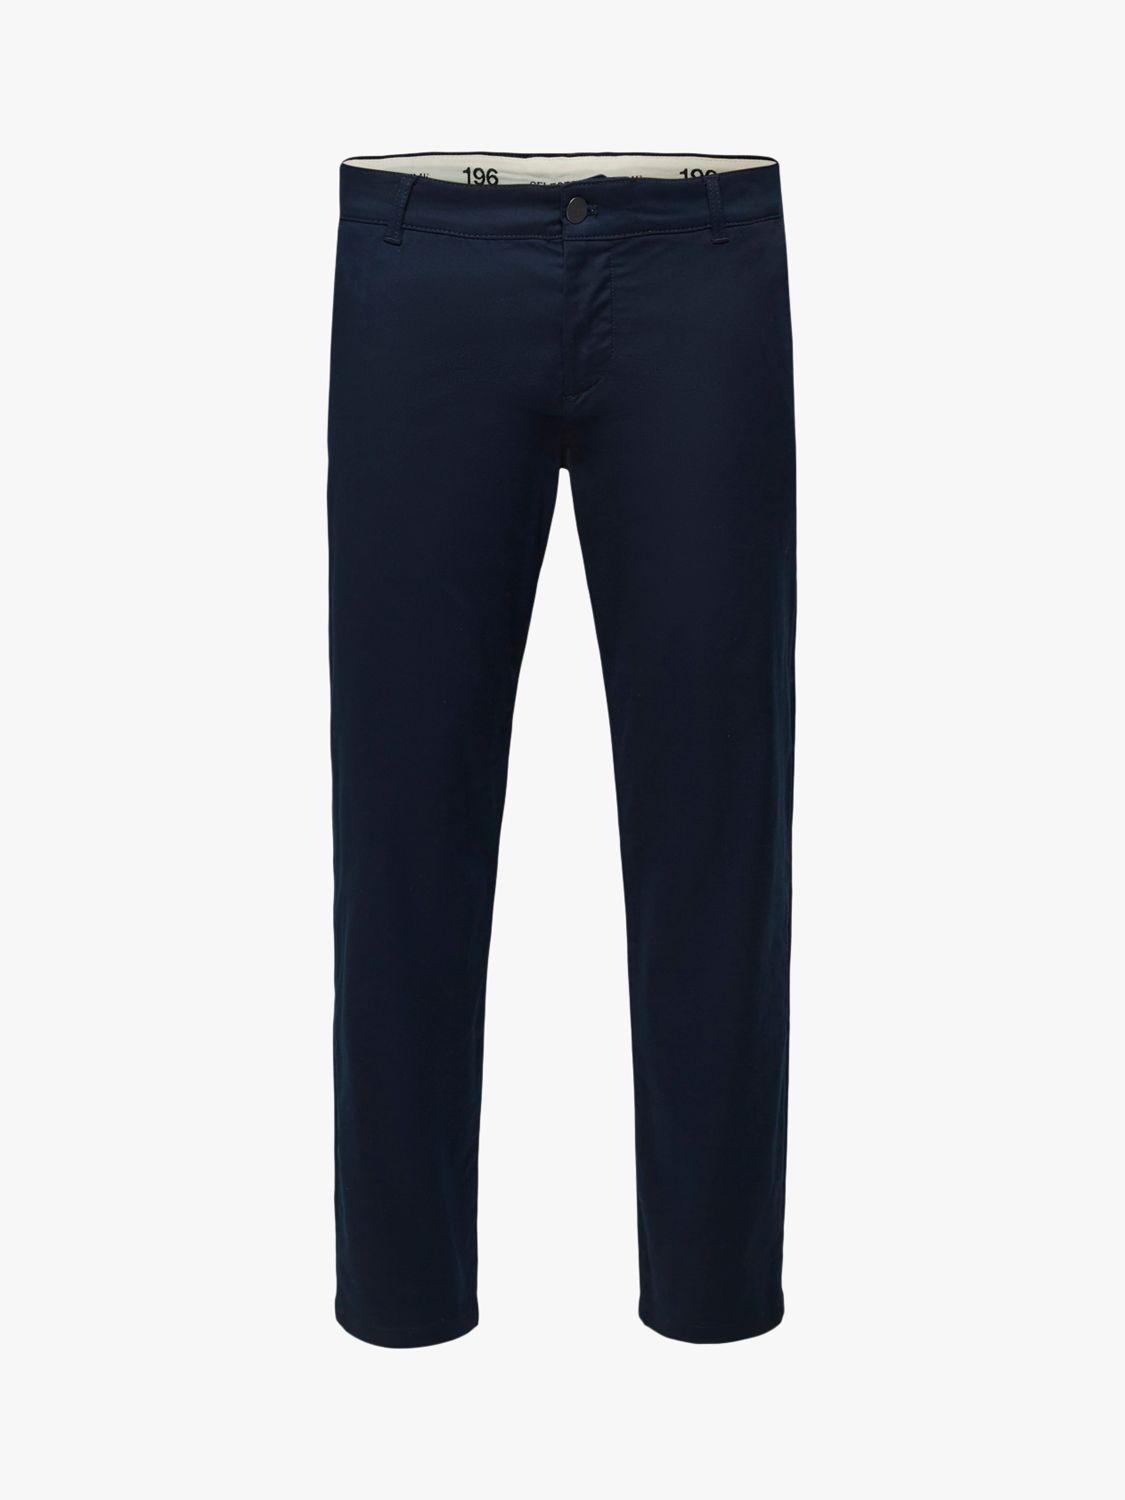 Dark & Chinos, HOMME Sapphire Partners SELECTED John at Straight Lewis